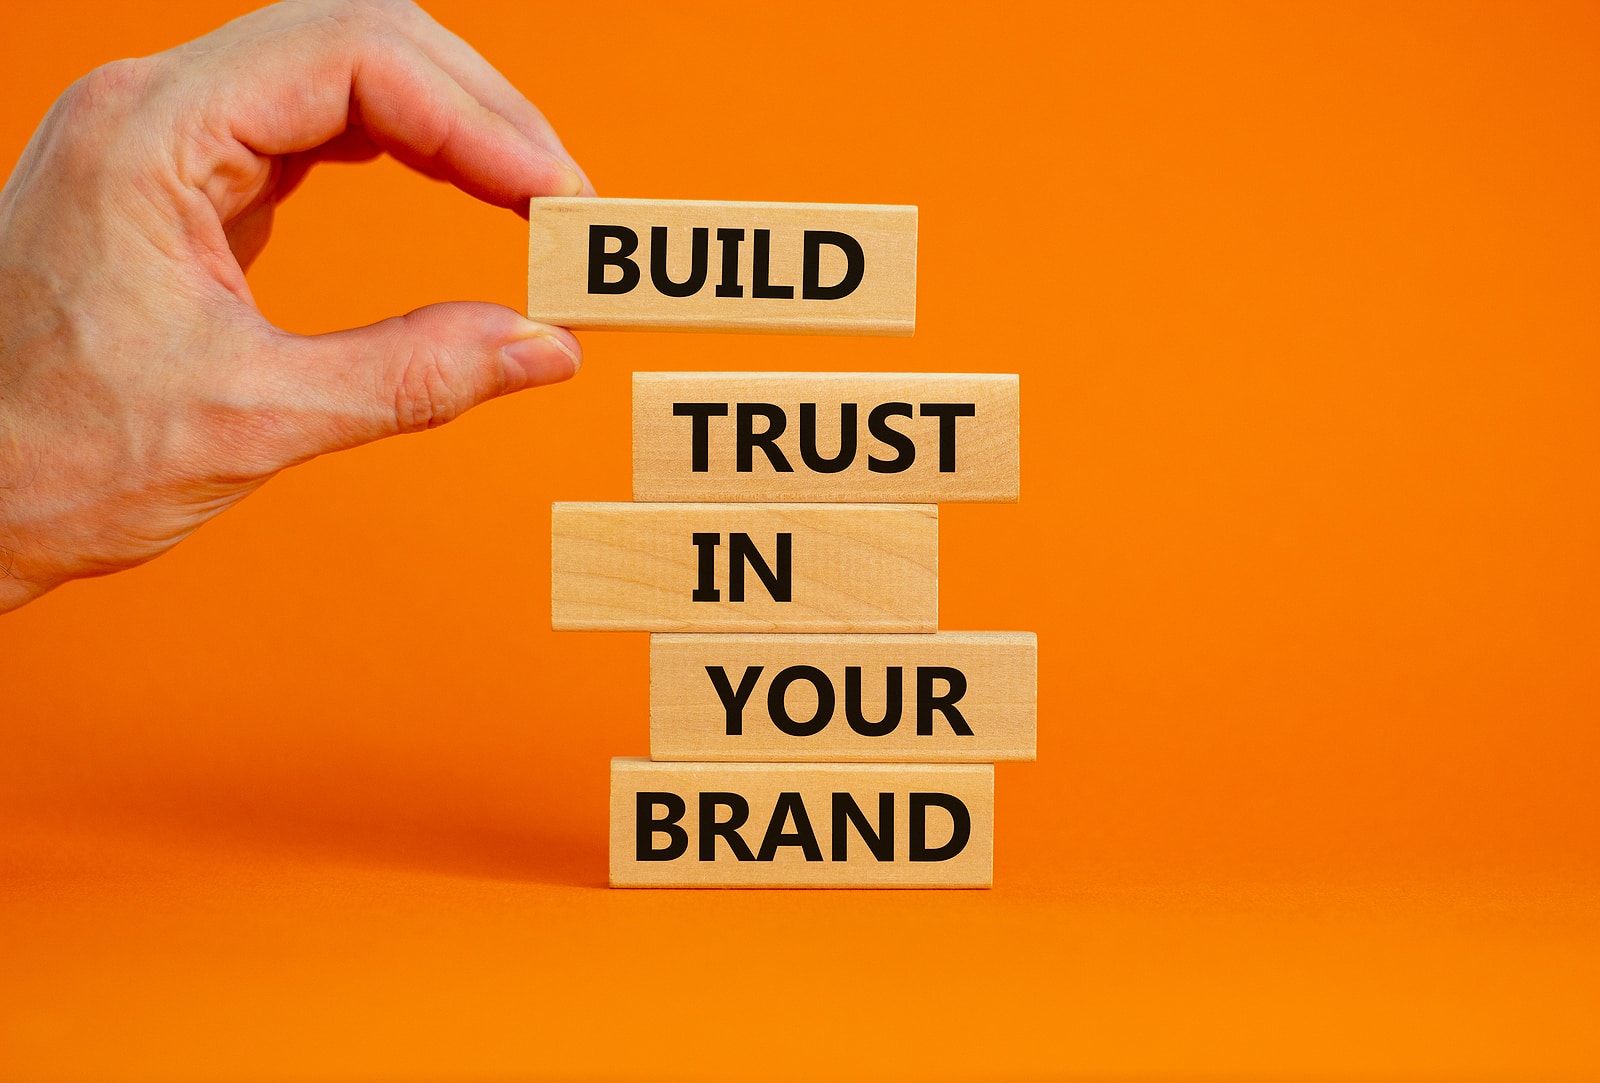 Make customers trust your business